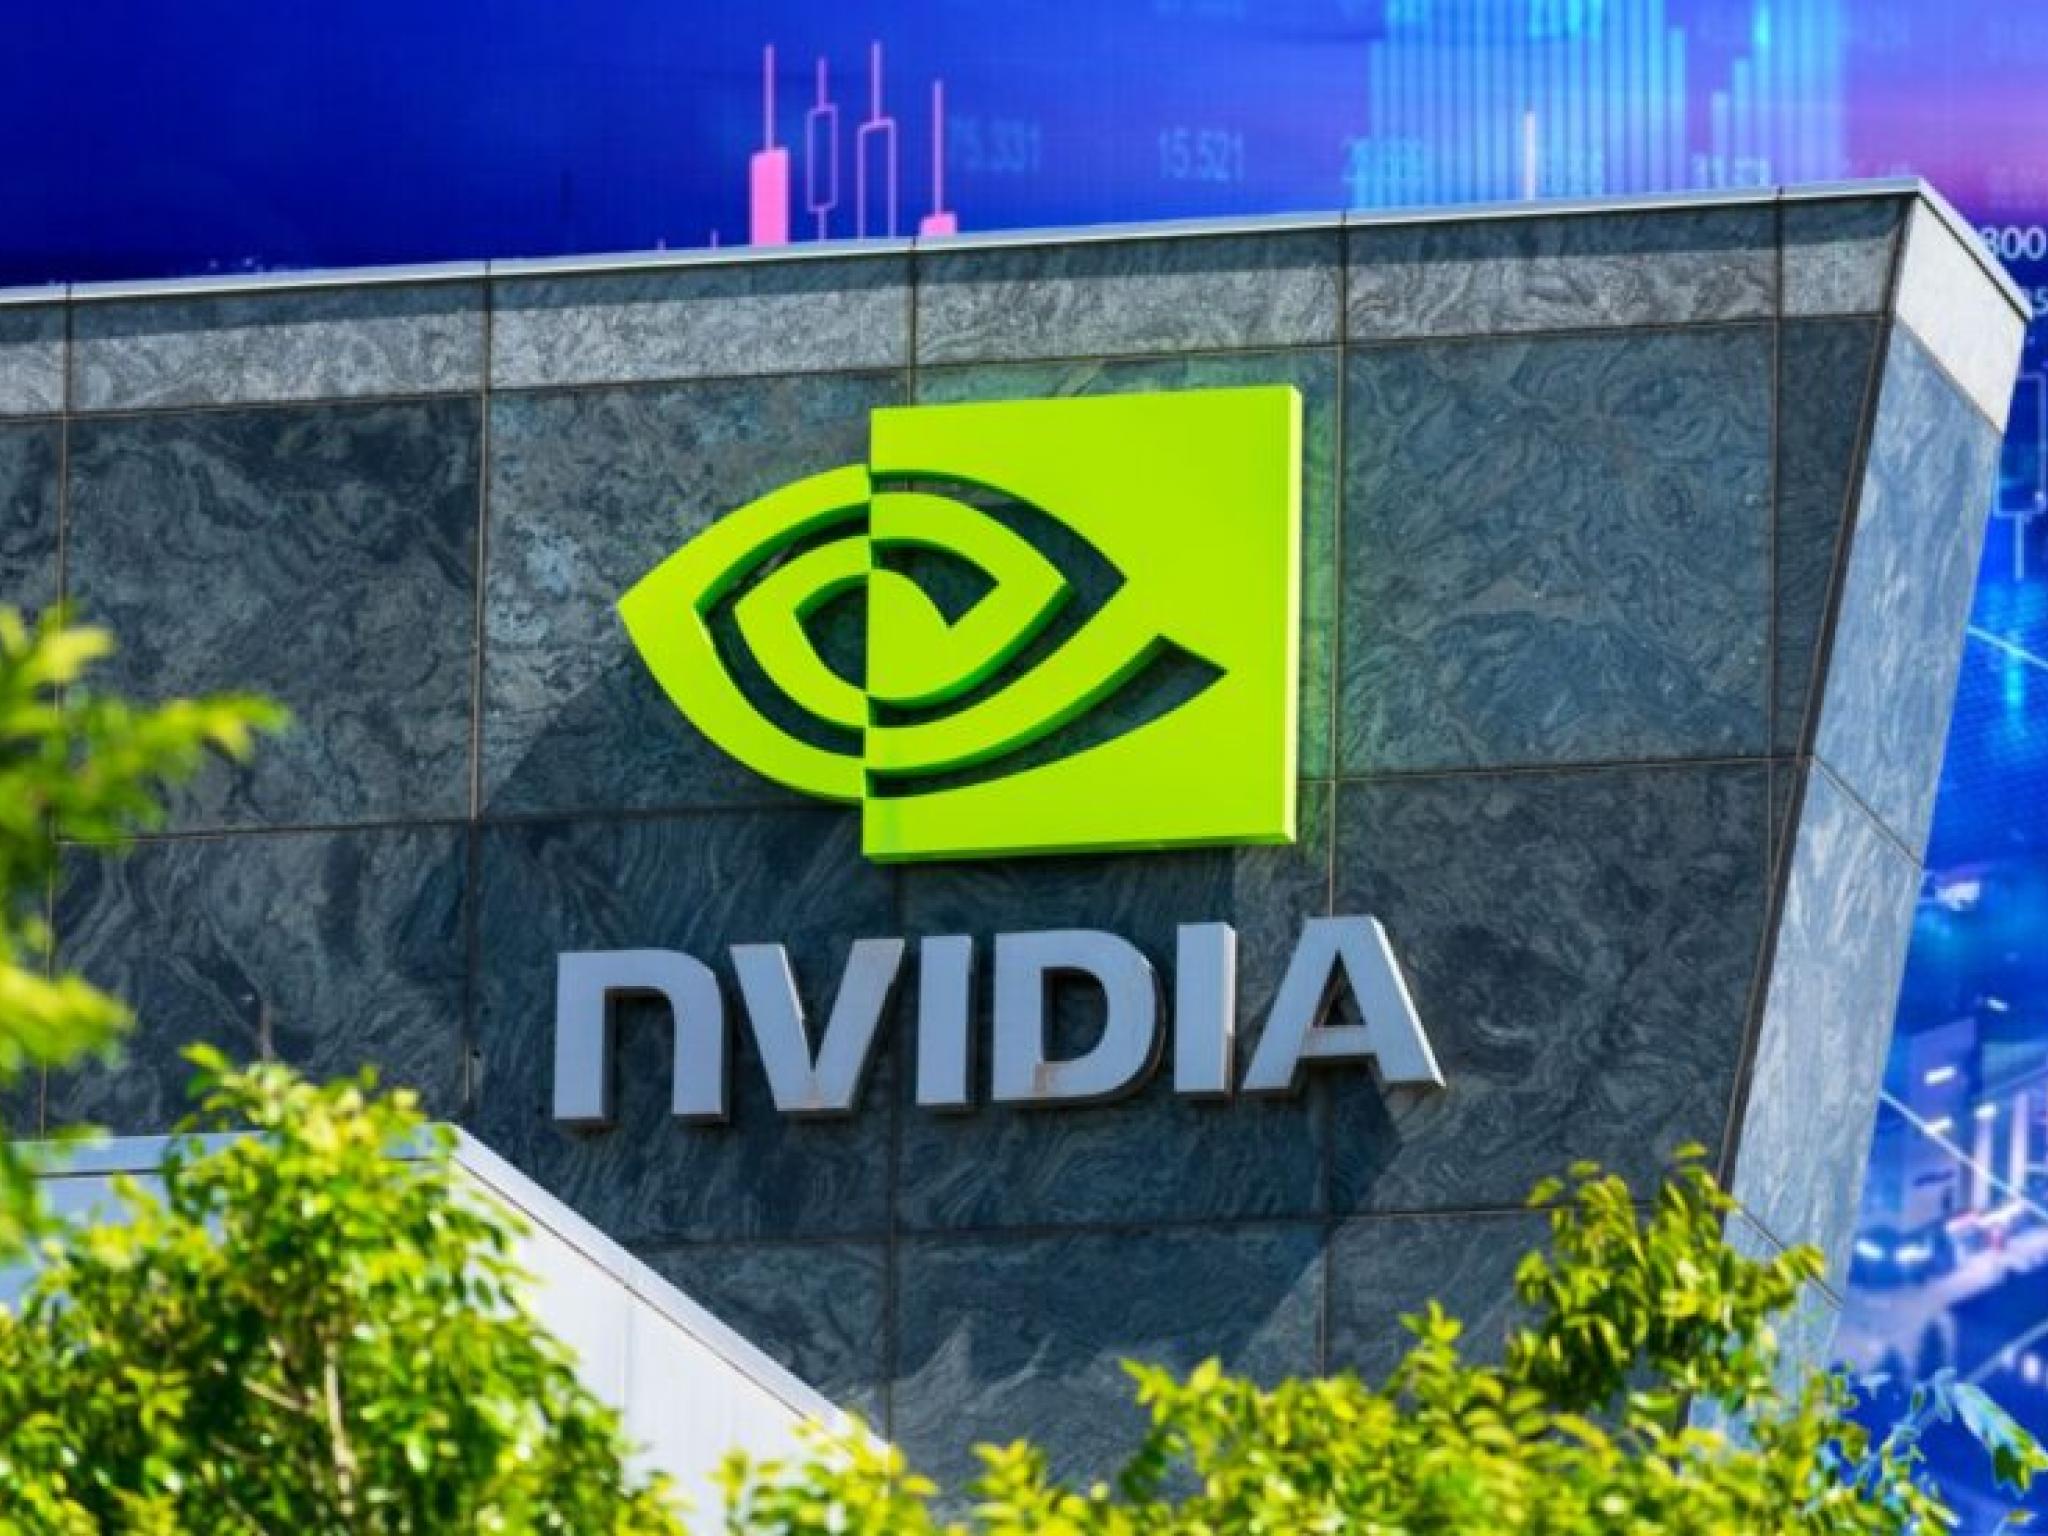  nvidia-could-be-worth-nearly-50-trillion-in-a-decade-says-early-tesla-amazon-investor-nearly-2x-that-of-us-or-3x-of-chinas-current-gdp 